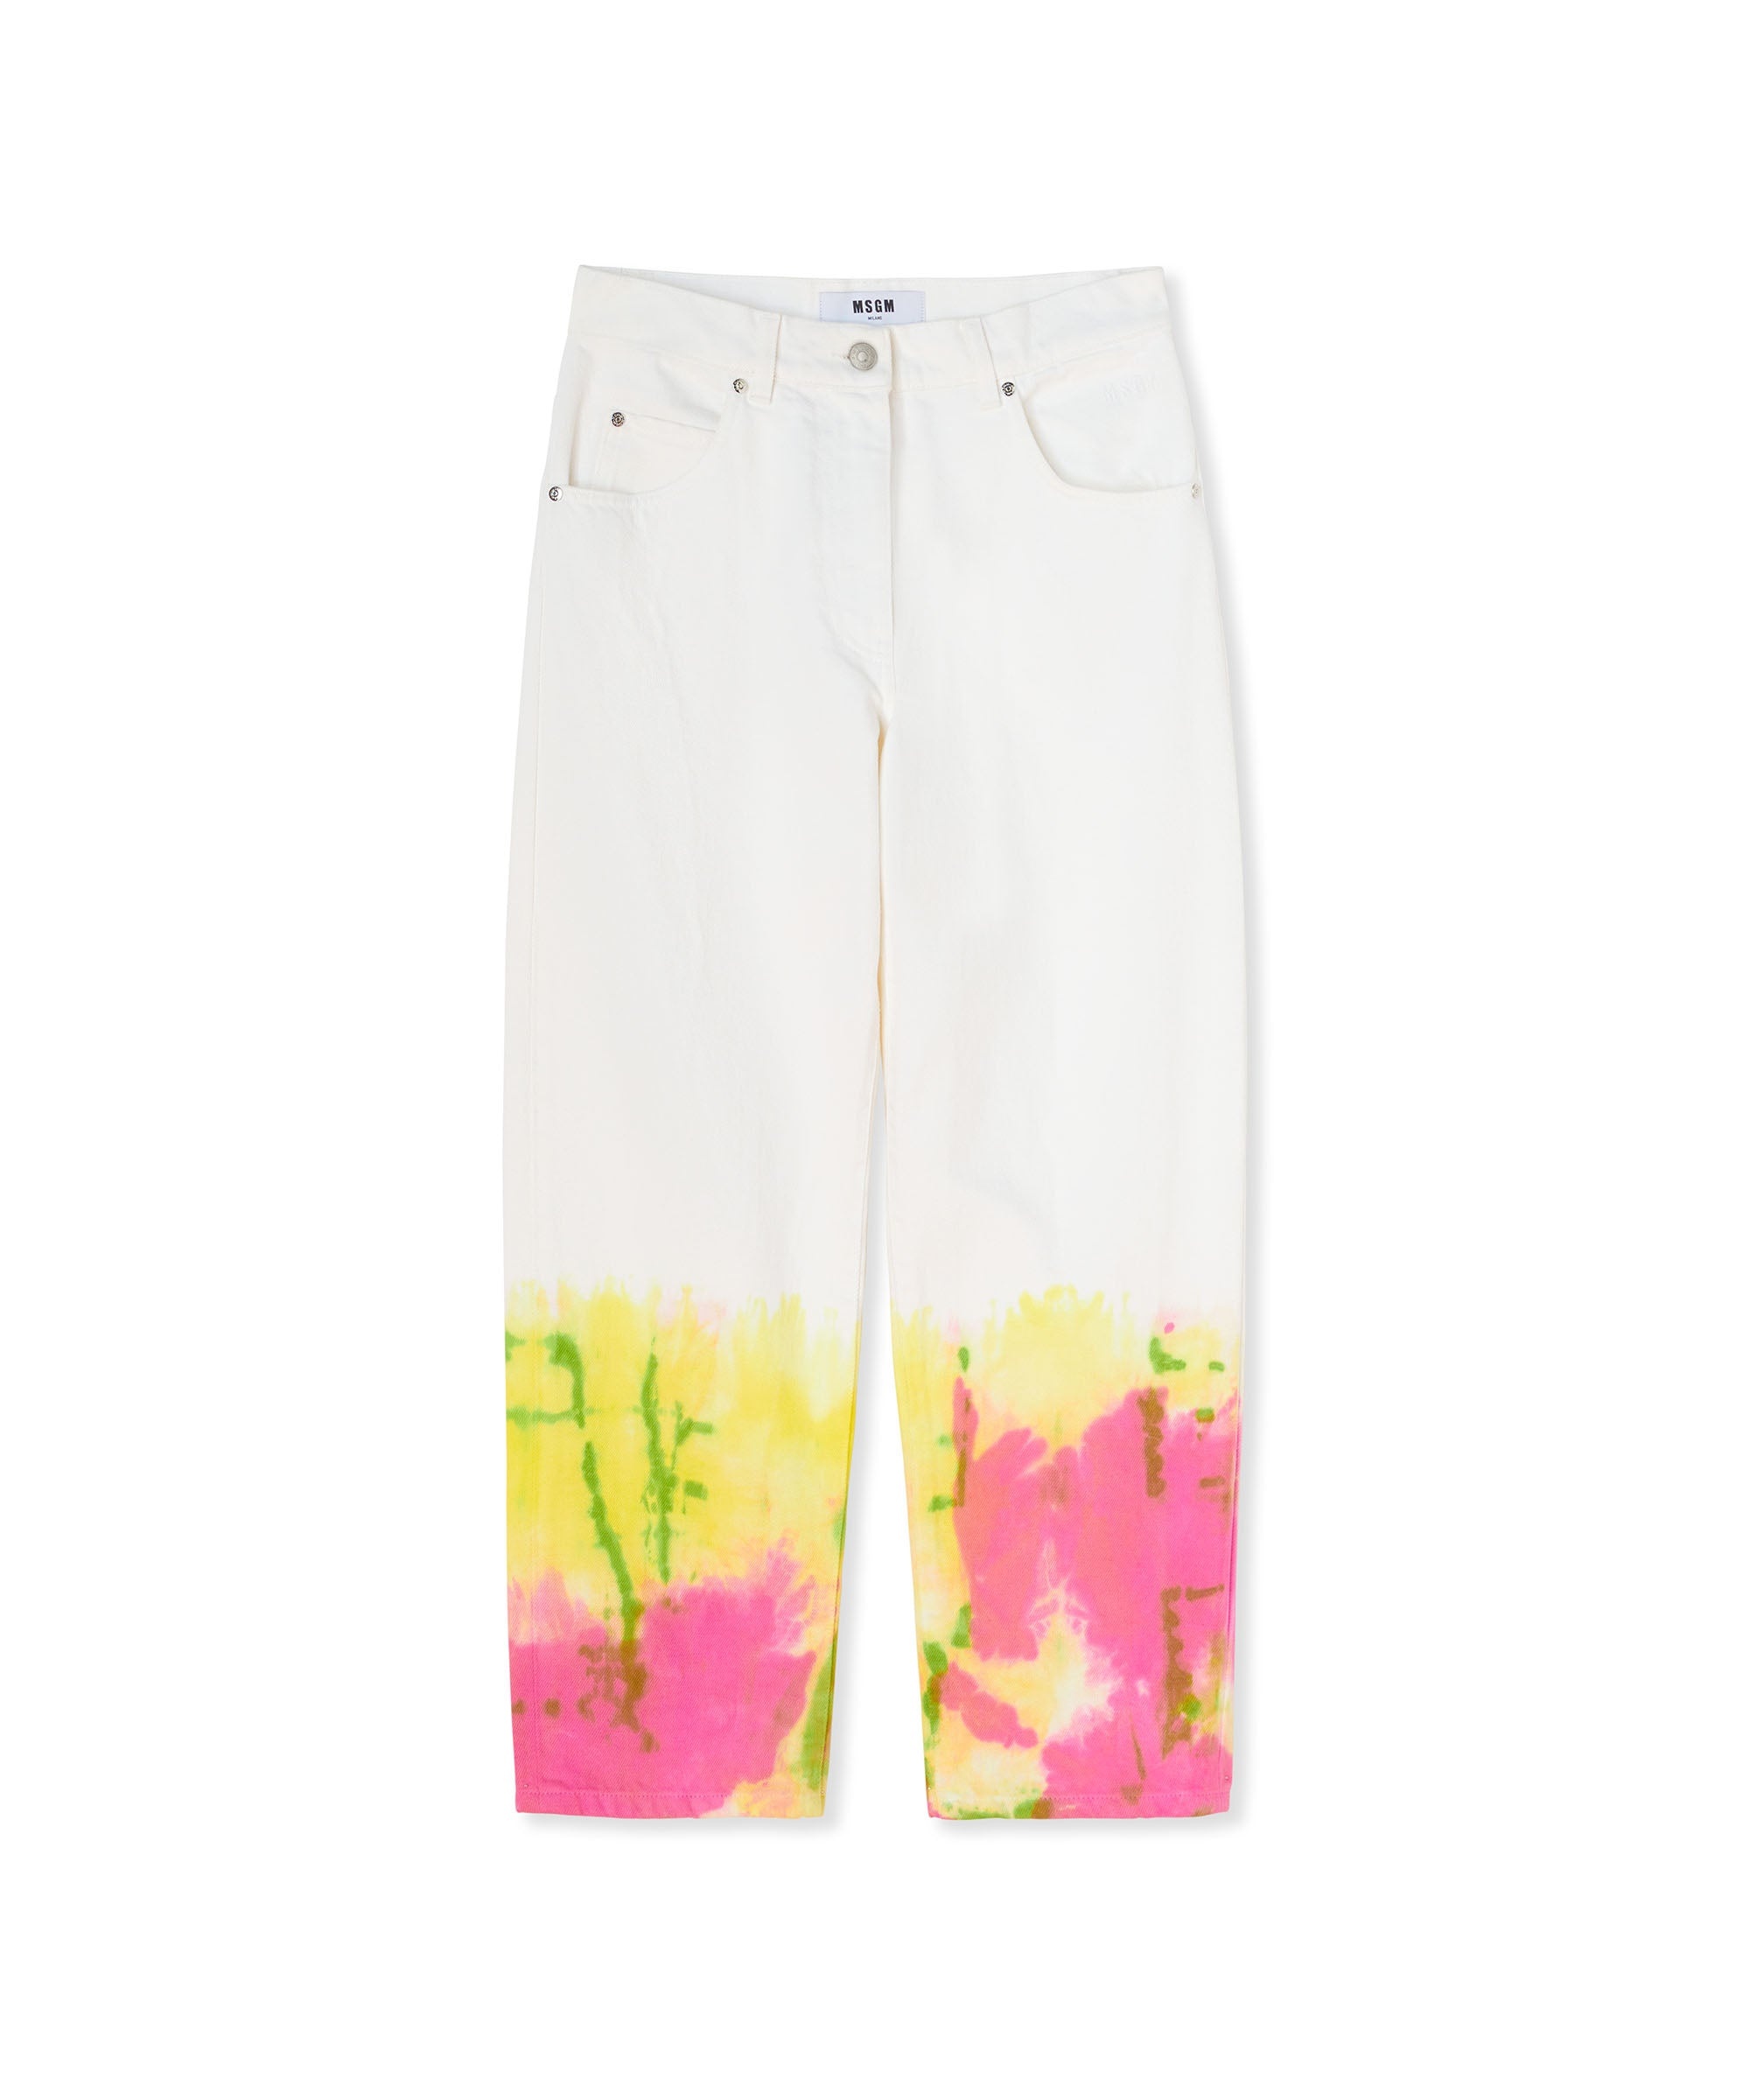 Bull cotton pants with tie-dye treatment - 1